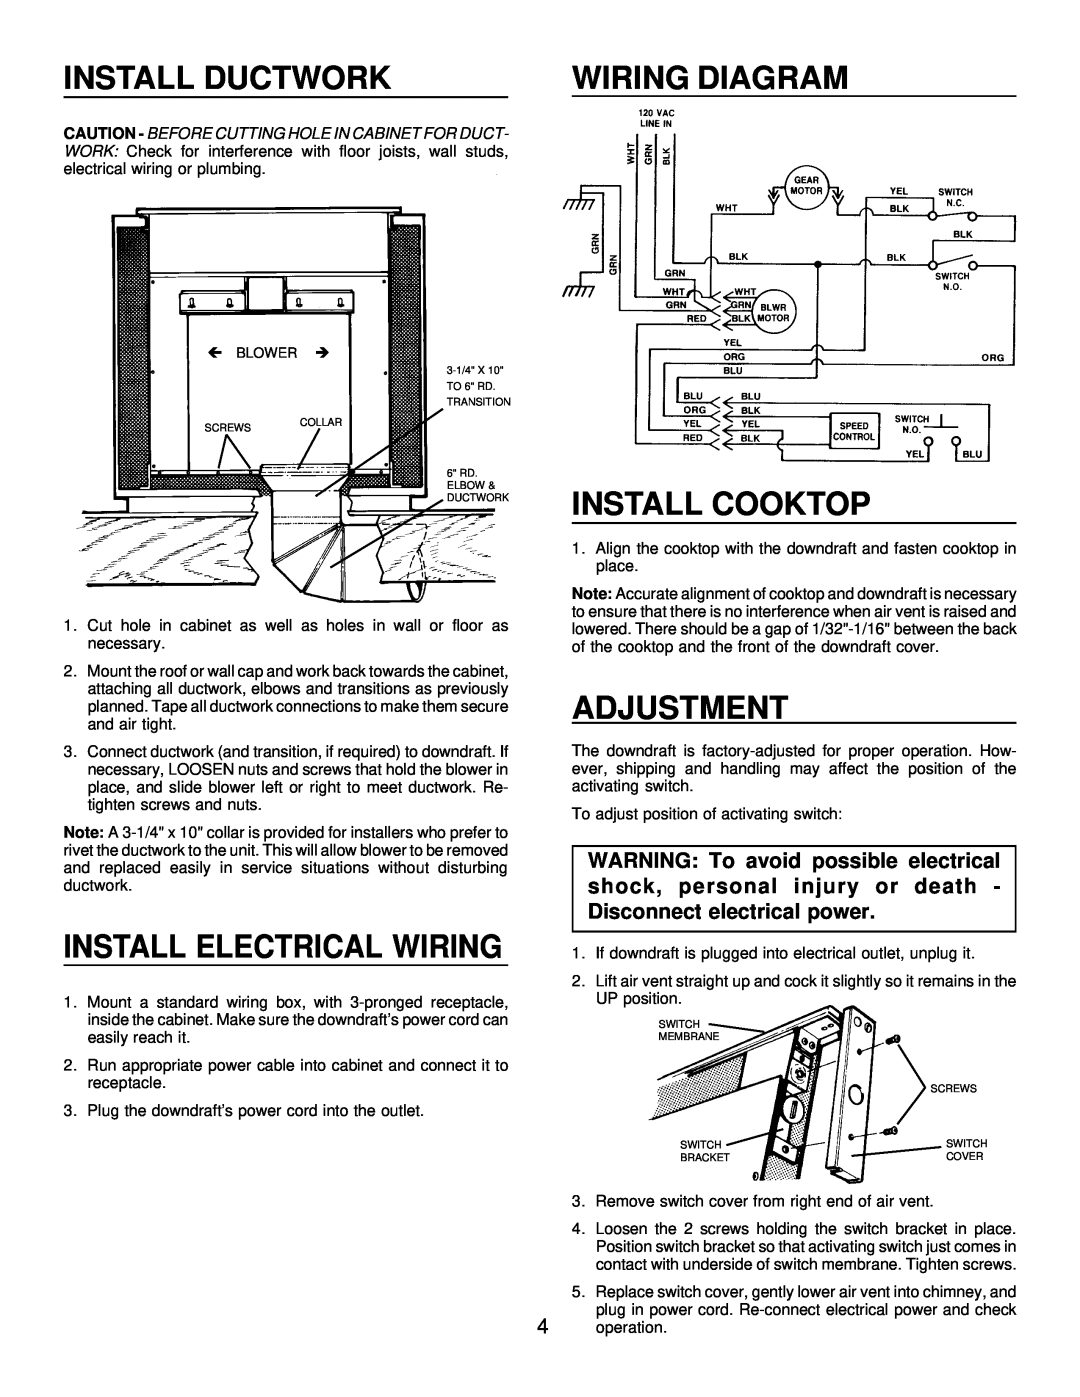 Frigidaire HV2736B, HV2730B Install Ductwork, Wiring Diagram, Install Cooktop, Install Electrical Wiring, Adjustment 